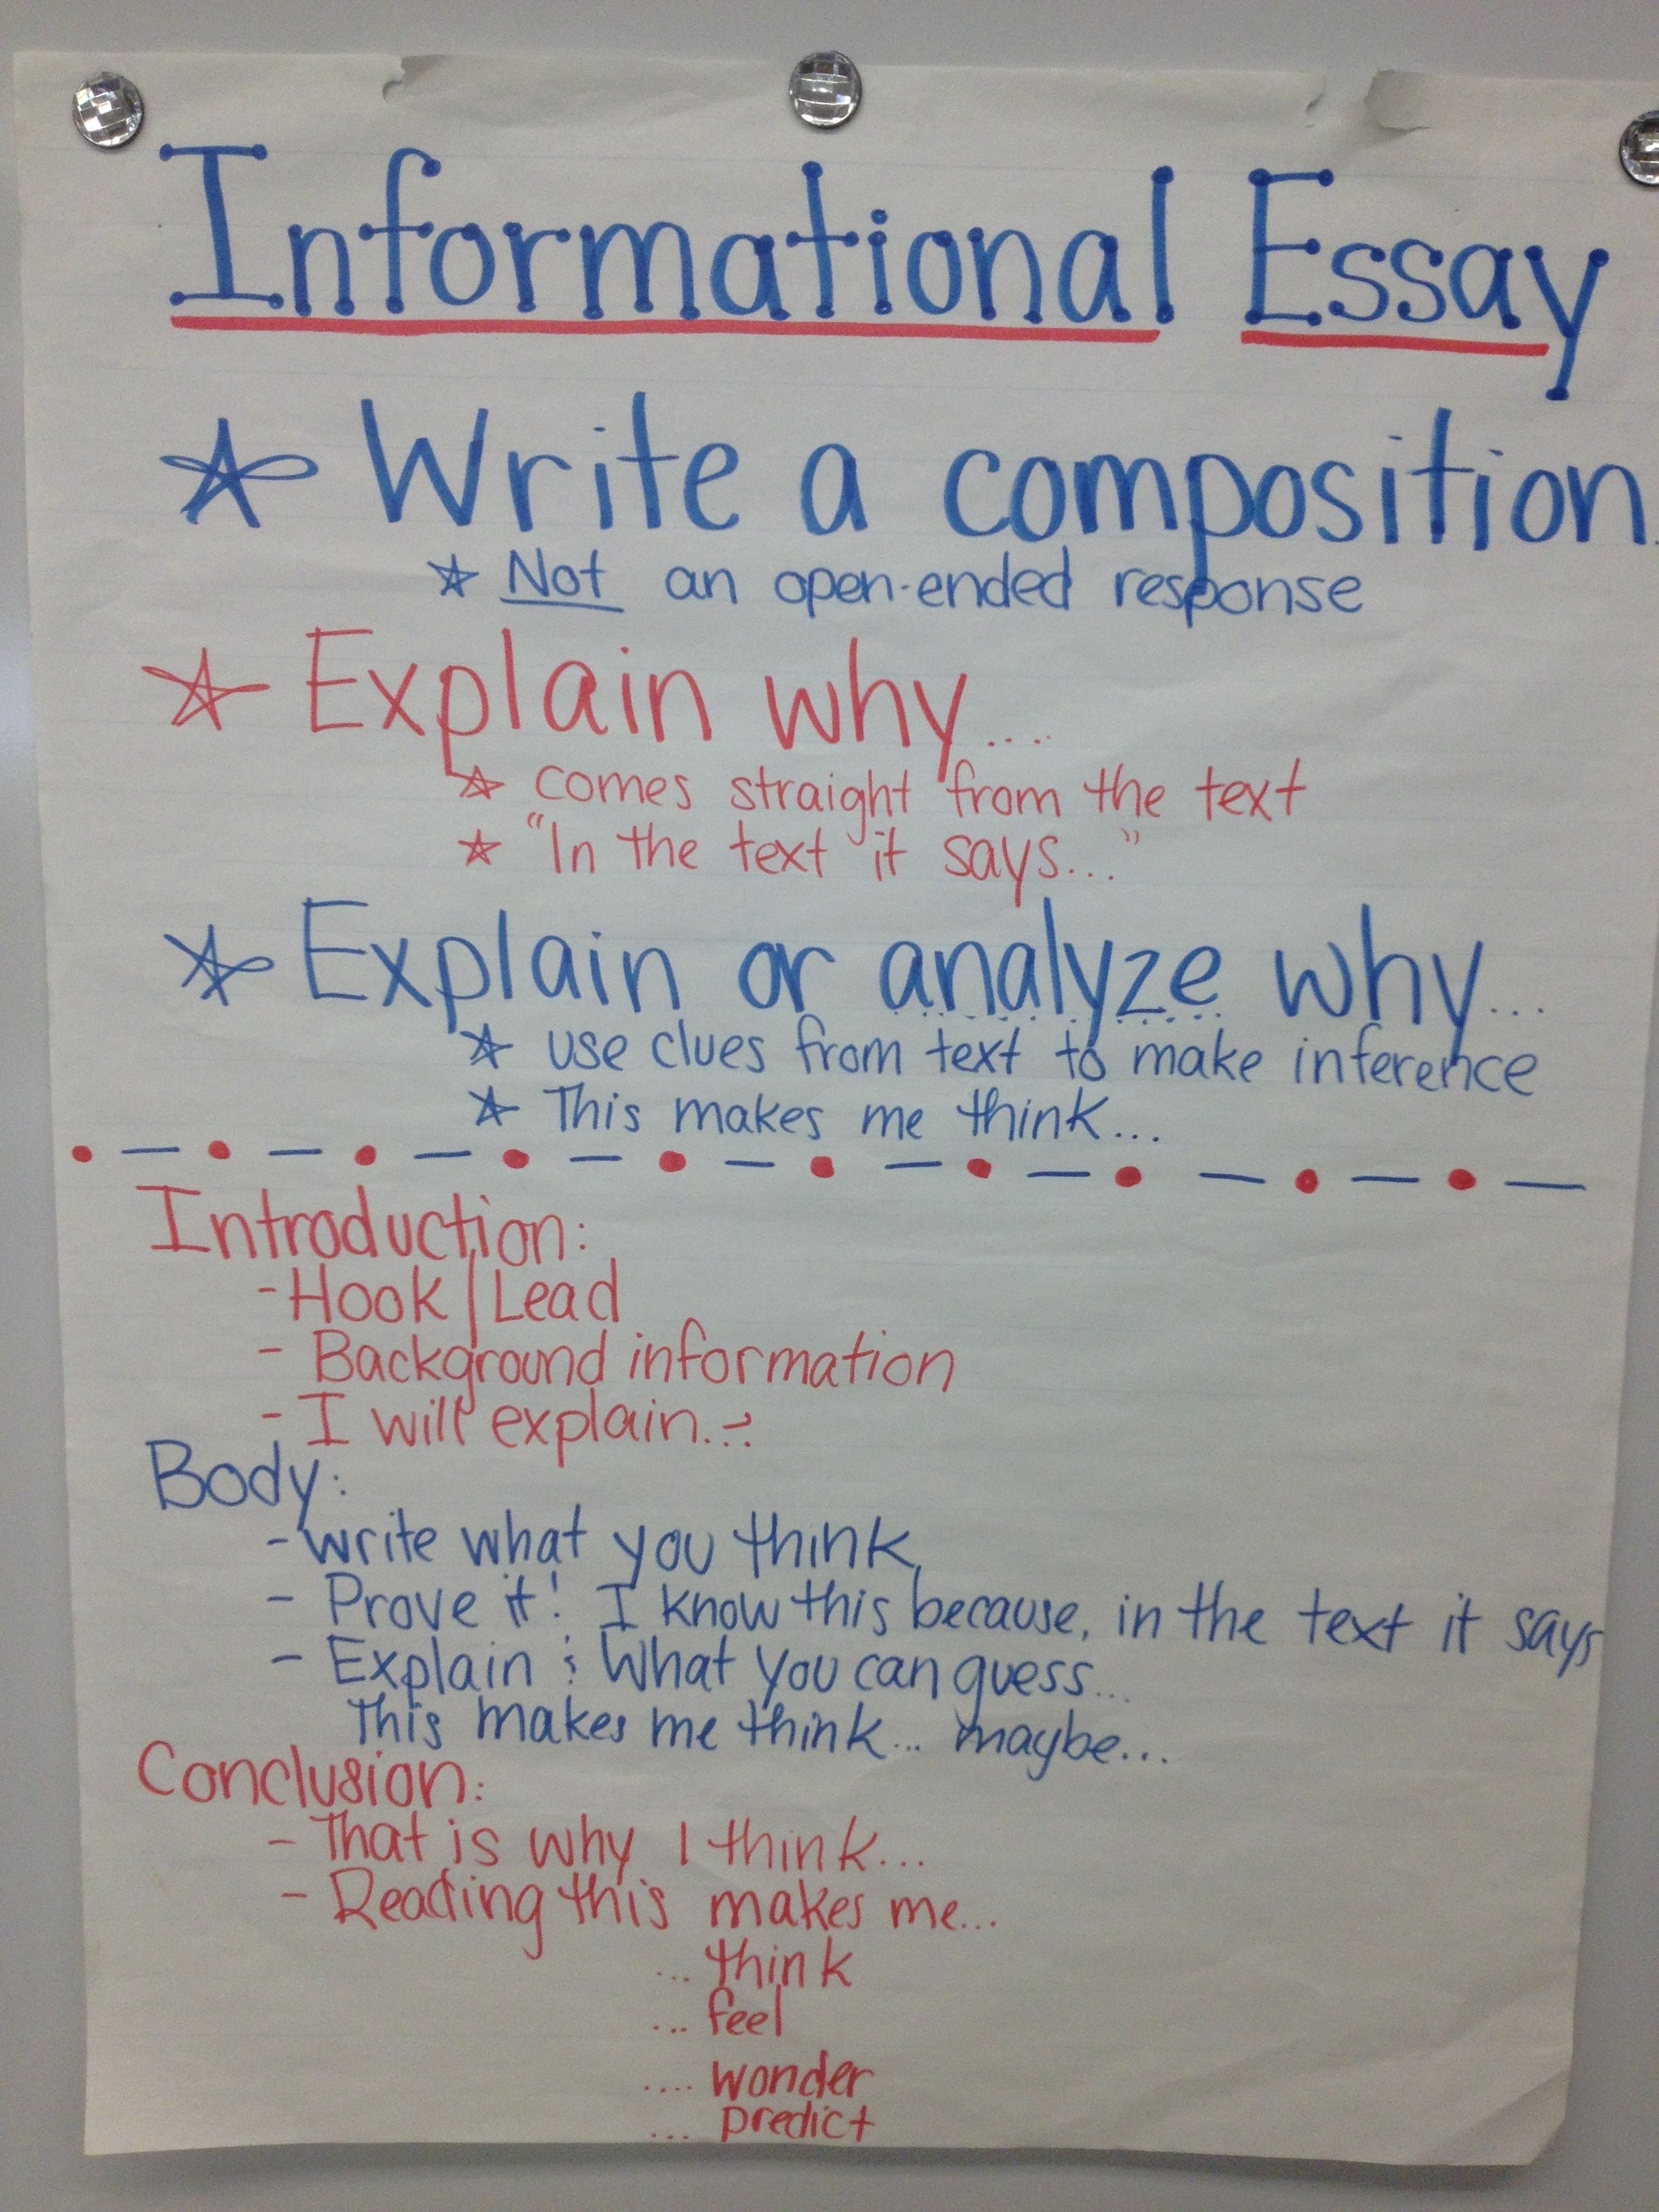 How to Write an Informative Essay Introduction